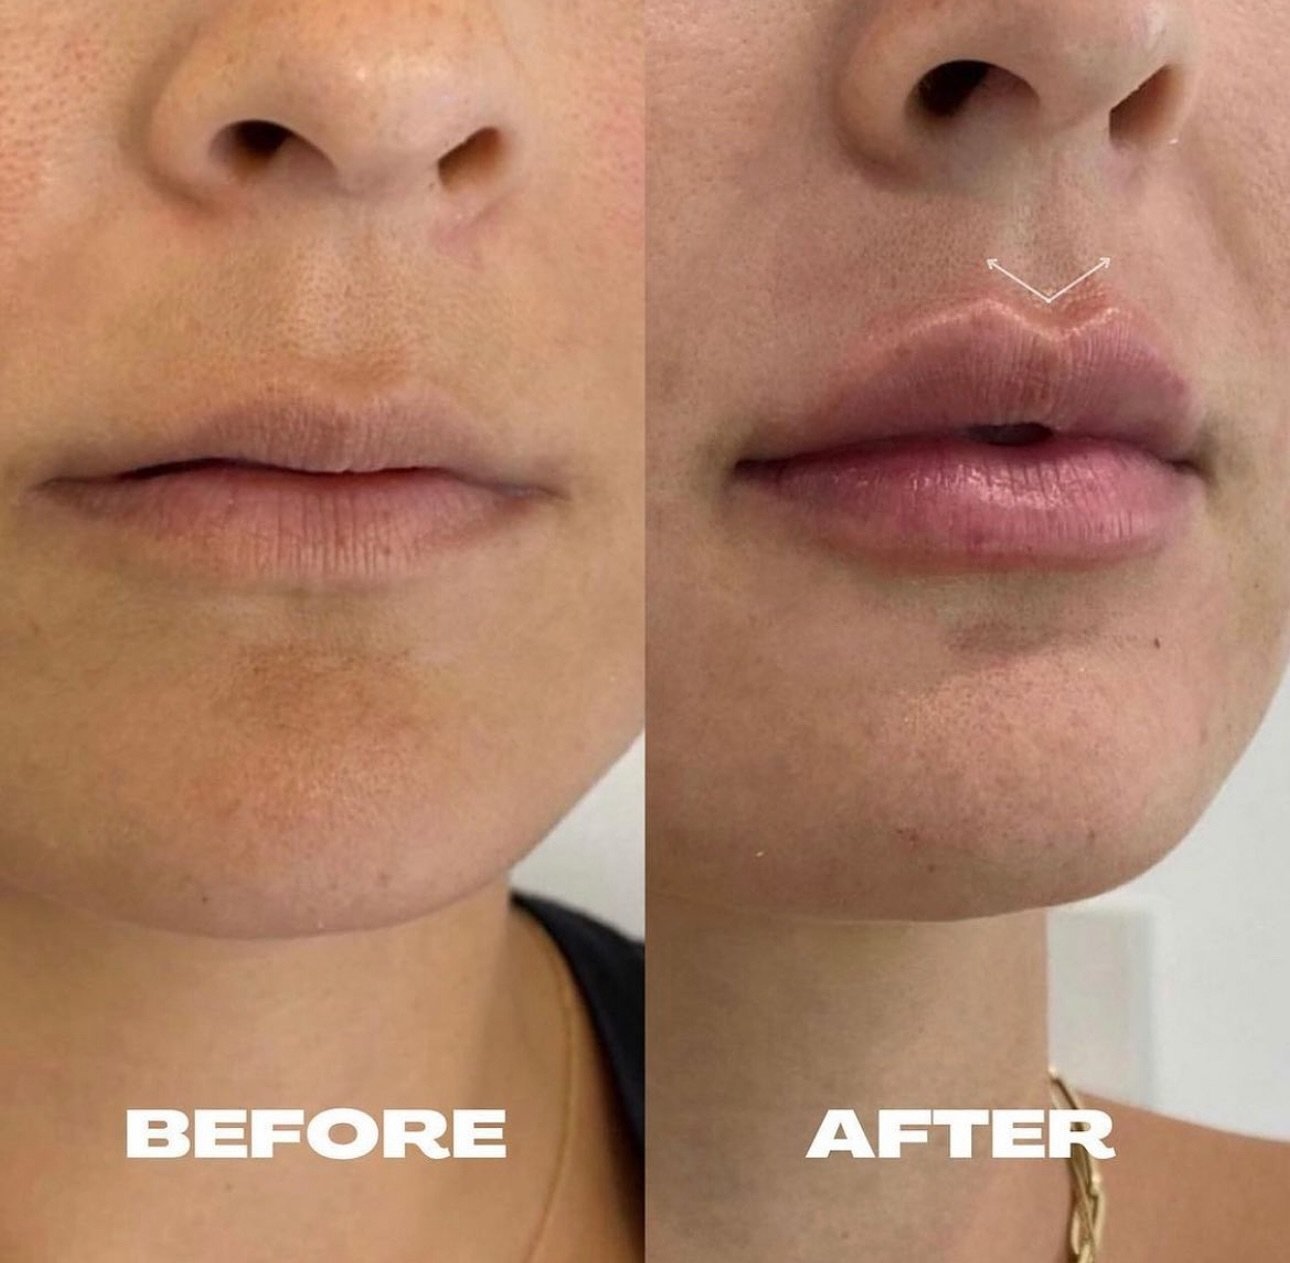 Some experts say that a defined Cupid&rsquo;s bow is the most attractive feature on the face. What do you think? 👄⬇️

Call us tat (818) 290-3938 to schedule an appointment!

Services we offer:
▪️ Fillers 
▪️ Anti-aging treatments
▪️ Facial Balancing